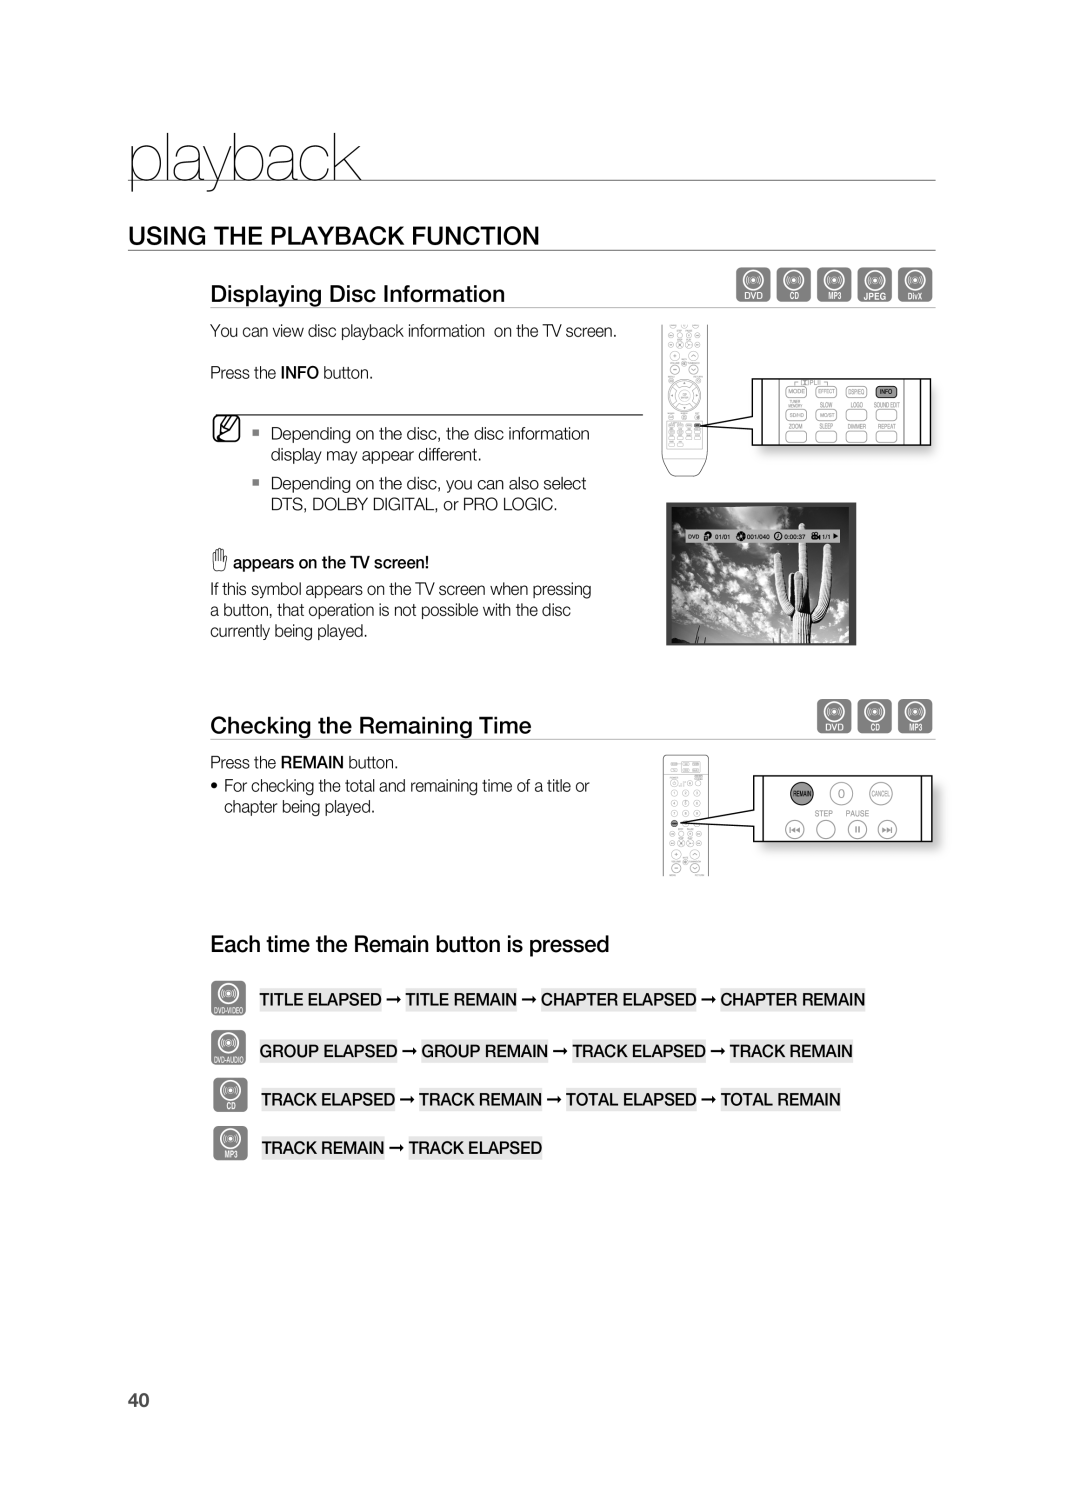 Samsung HT-TZ515 user manual dBAGD, USINg THE PLAYBACK FUNCTION, playback 